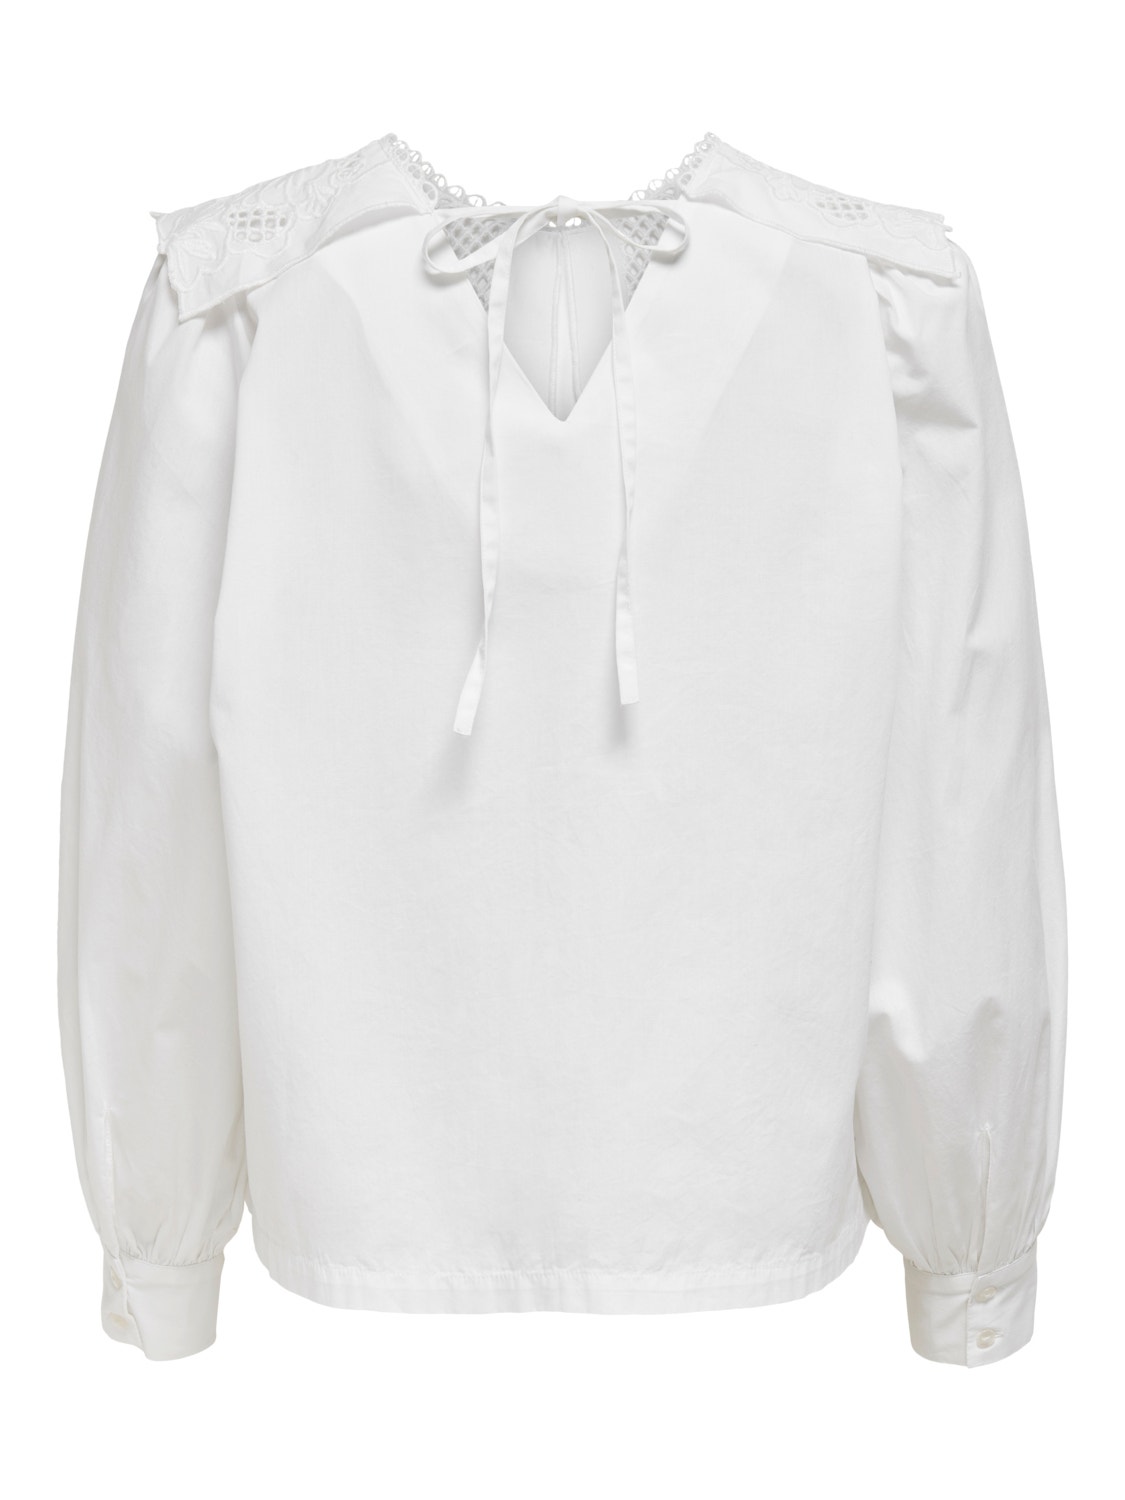 ONLY Collar Top -White - 15233634